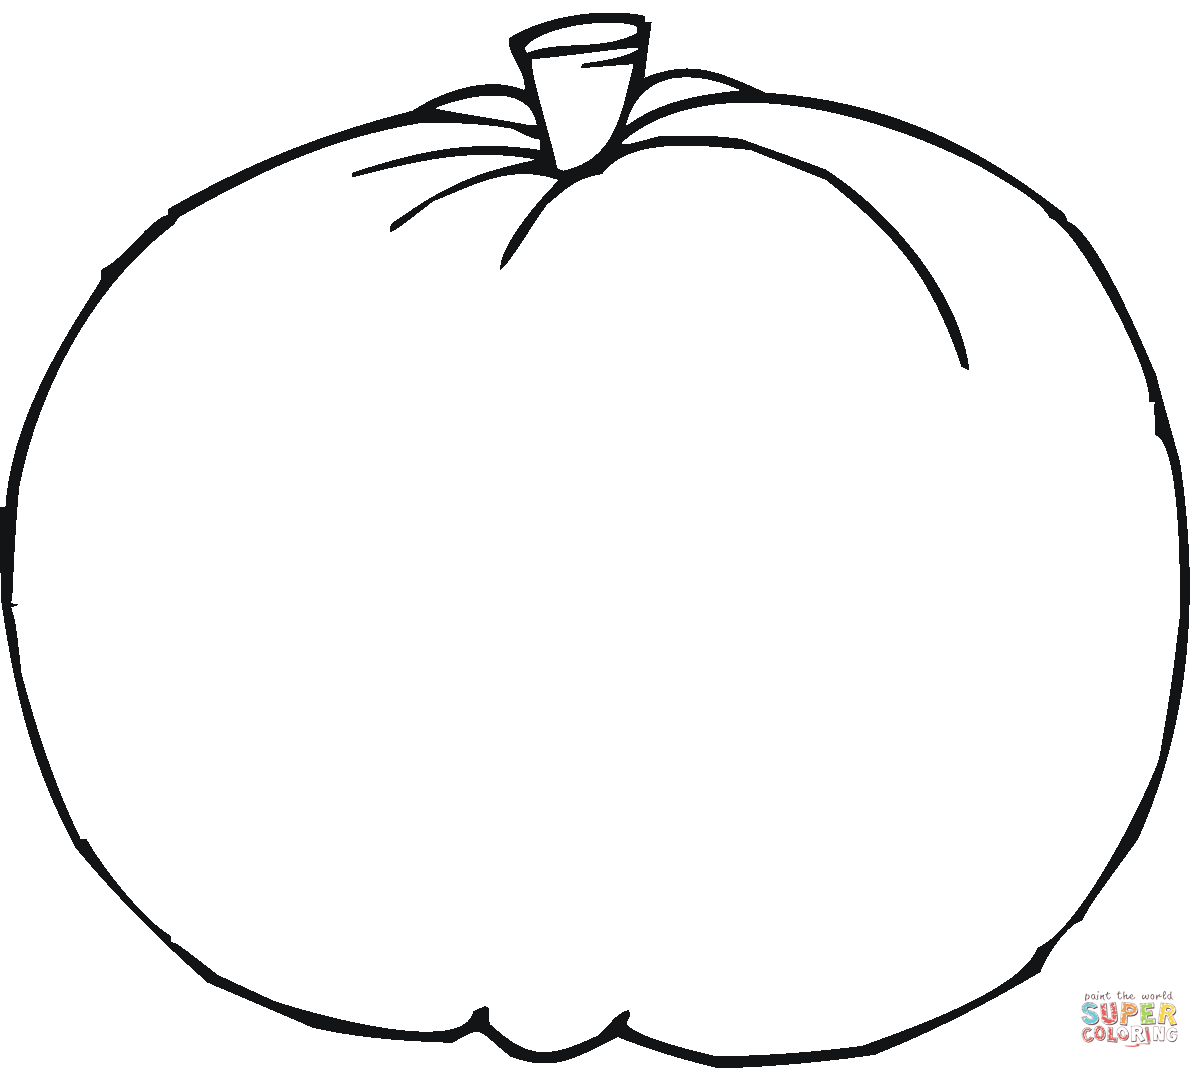 halloween pictures to color pumpkin free printable pumpkin coloring pages for kids to pumpkin pictures halloween color 